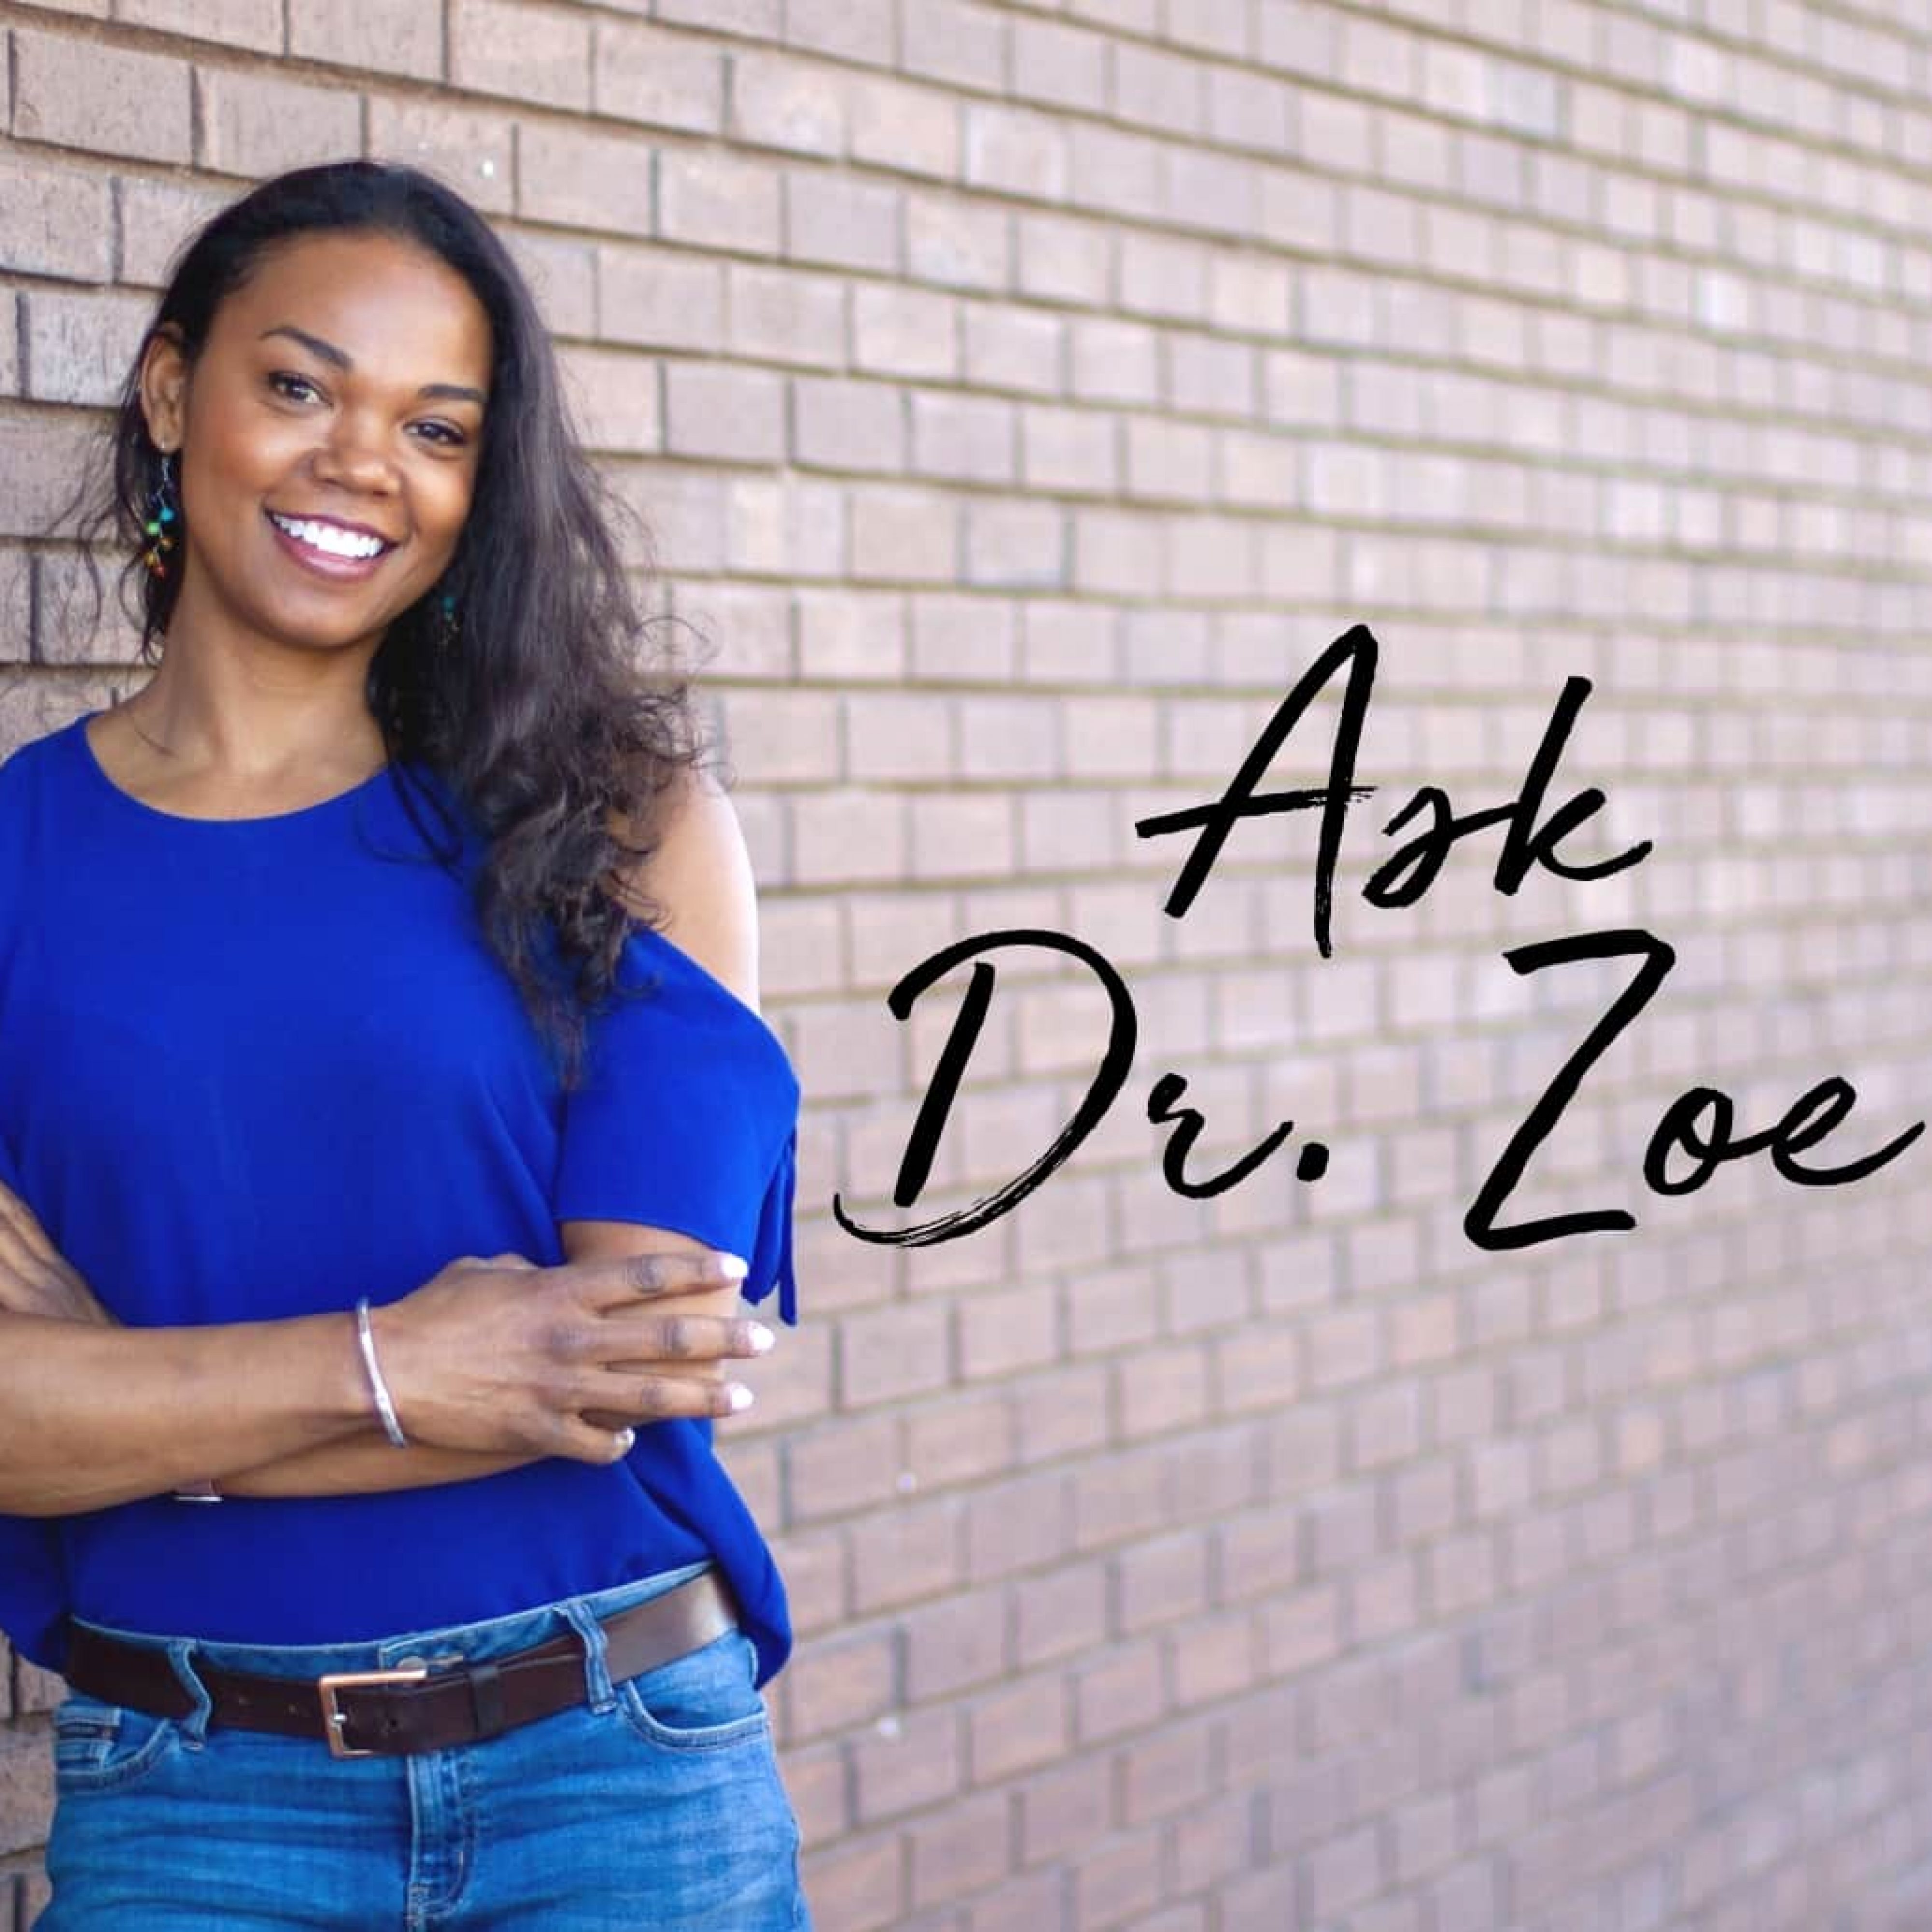 Ask Dr. Zoe - What Steps Can I Take to Stop Feeling Overwhelmed?